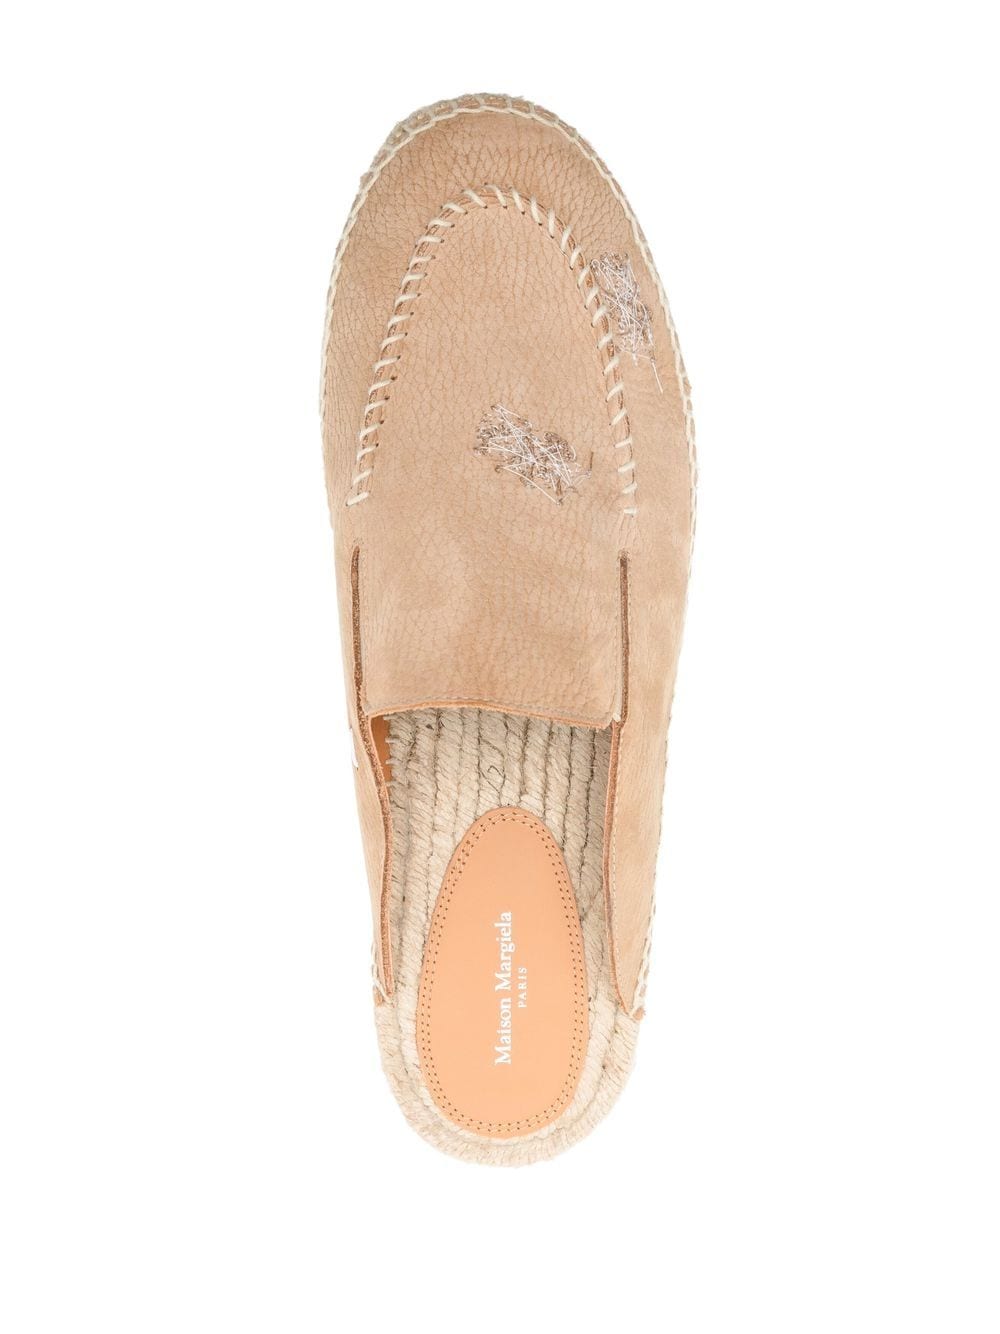 embroidered espadrille mules